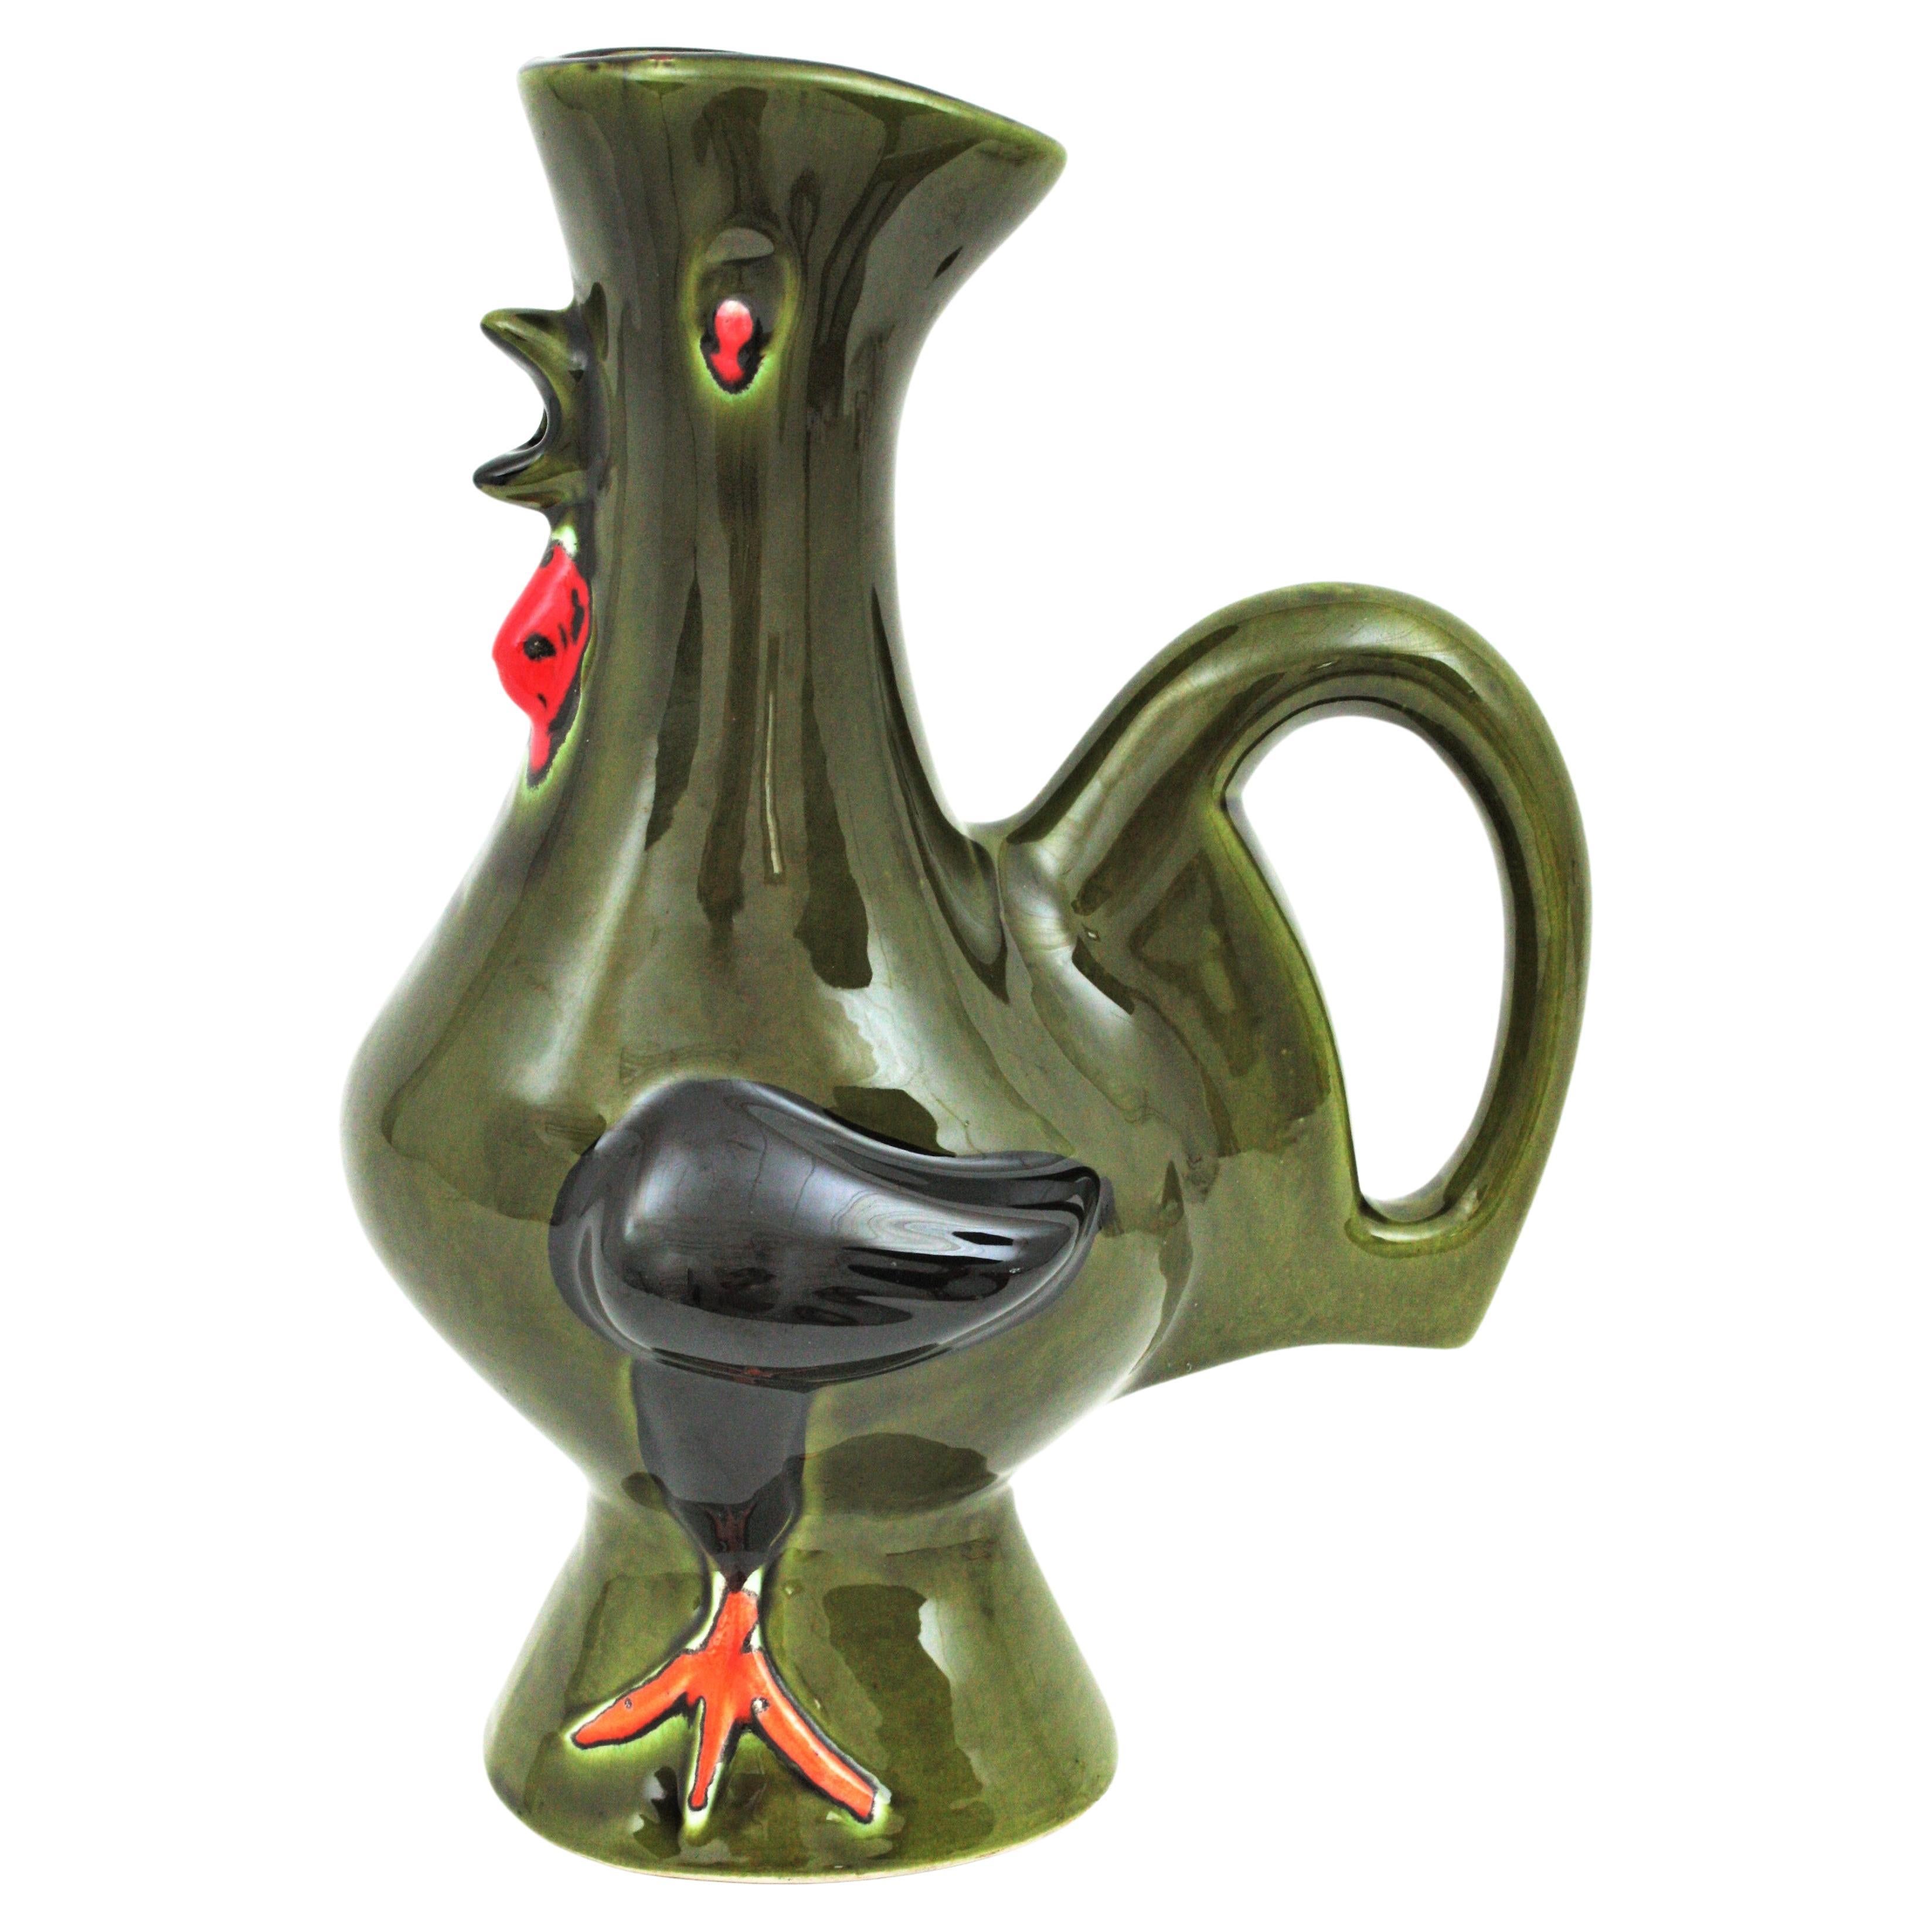 Eye-catching green Majolica ceramic rooster jug / pitcher, France, 1950s.
Handcrafted in green glazed ceramic with red, black and orange accents.
A cool accent to any kitchen or to be user as serving pitcher. Lovely as a part of a ceramics